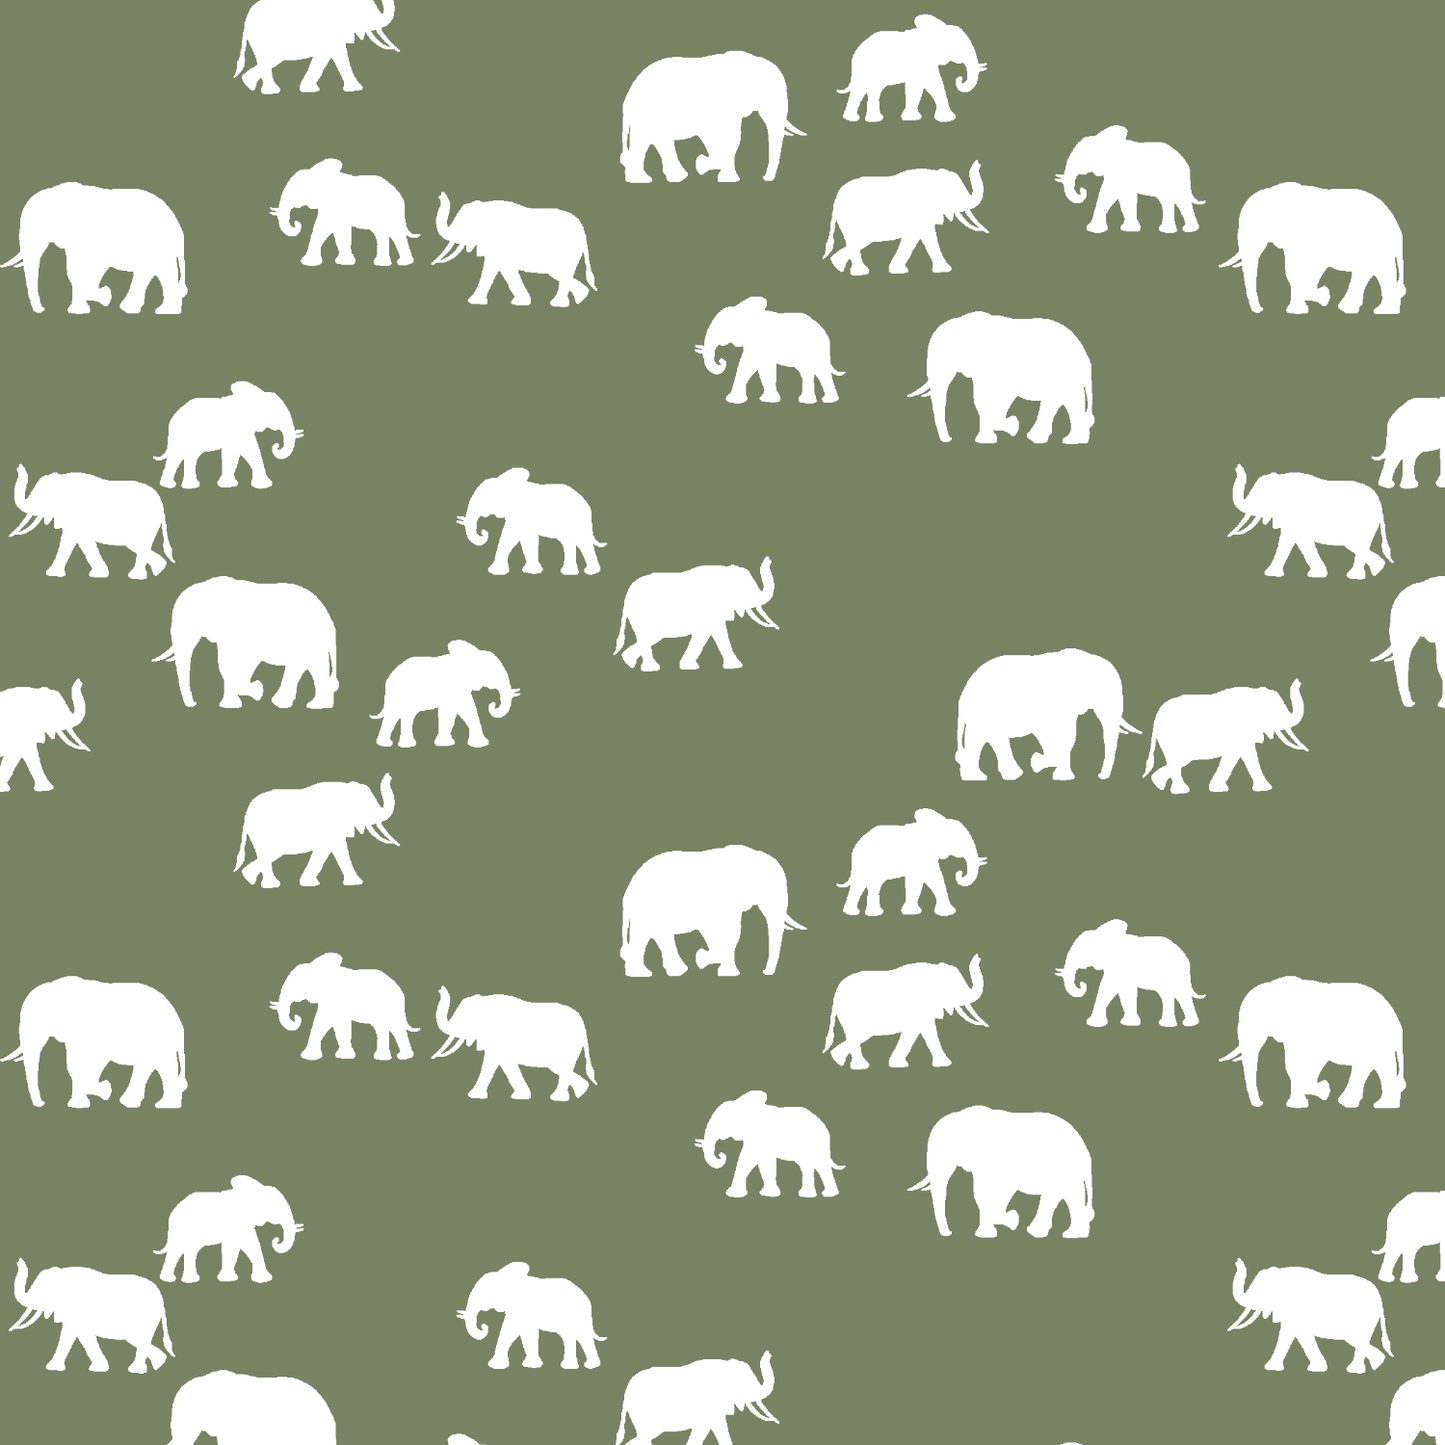 Elephant Silhouette in Olive